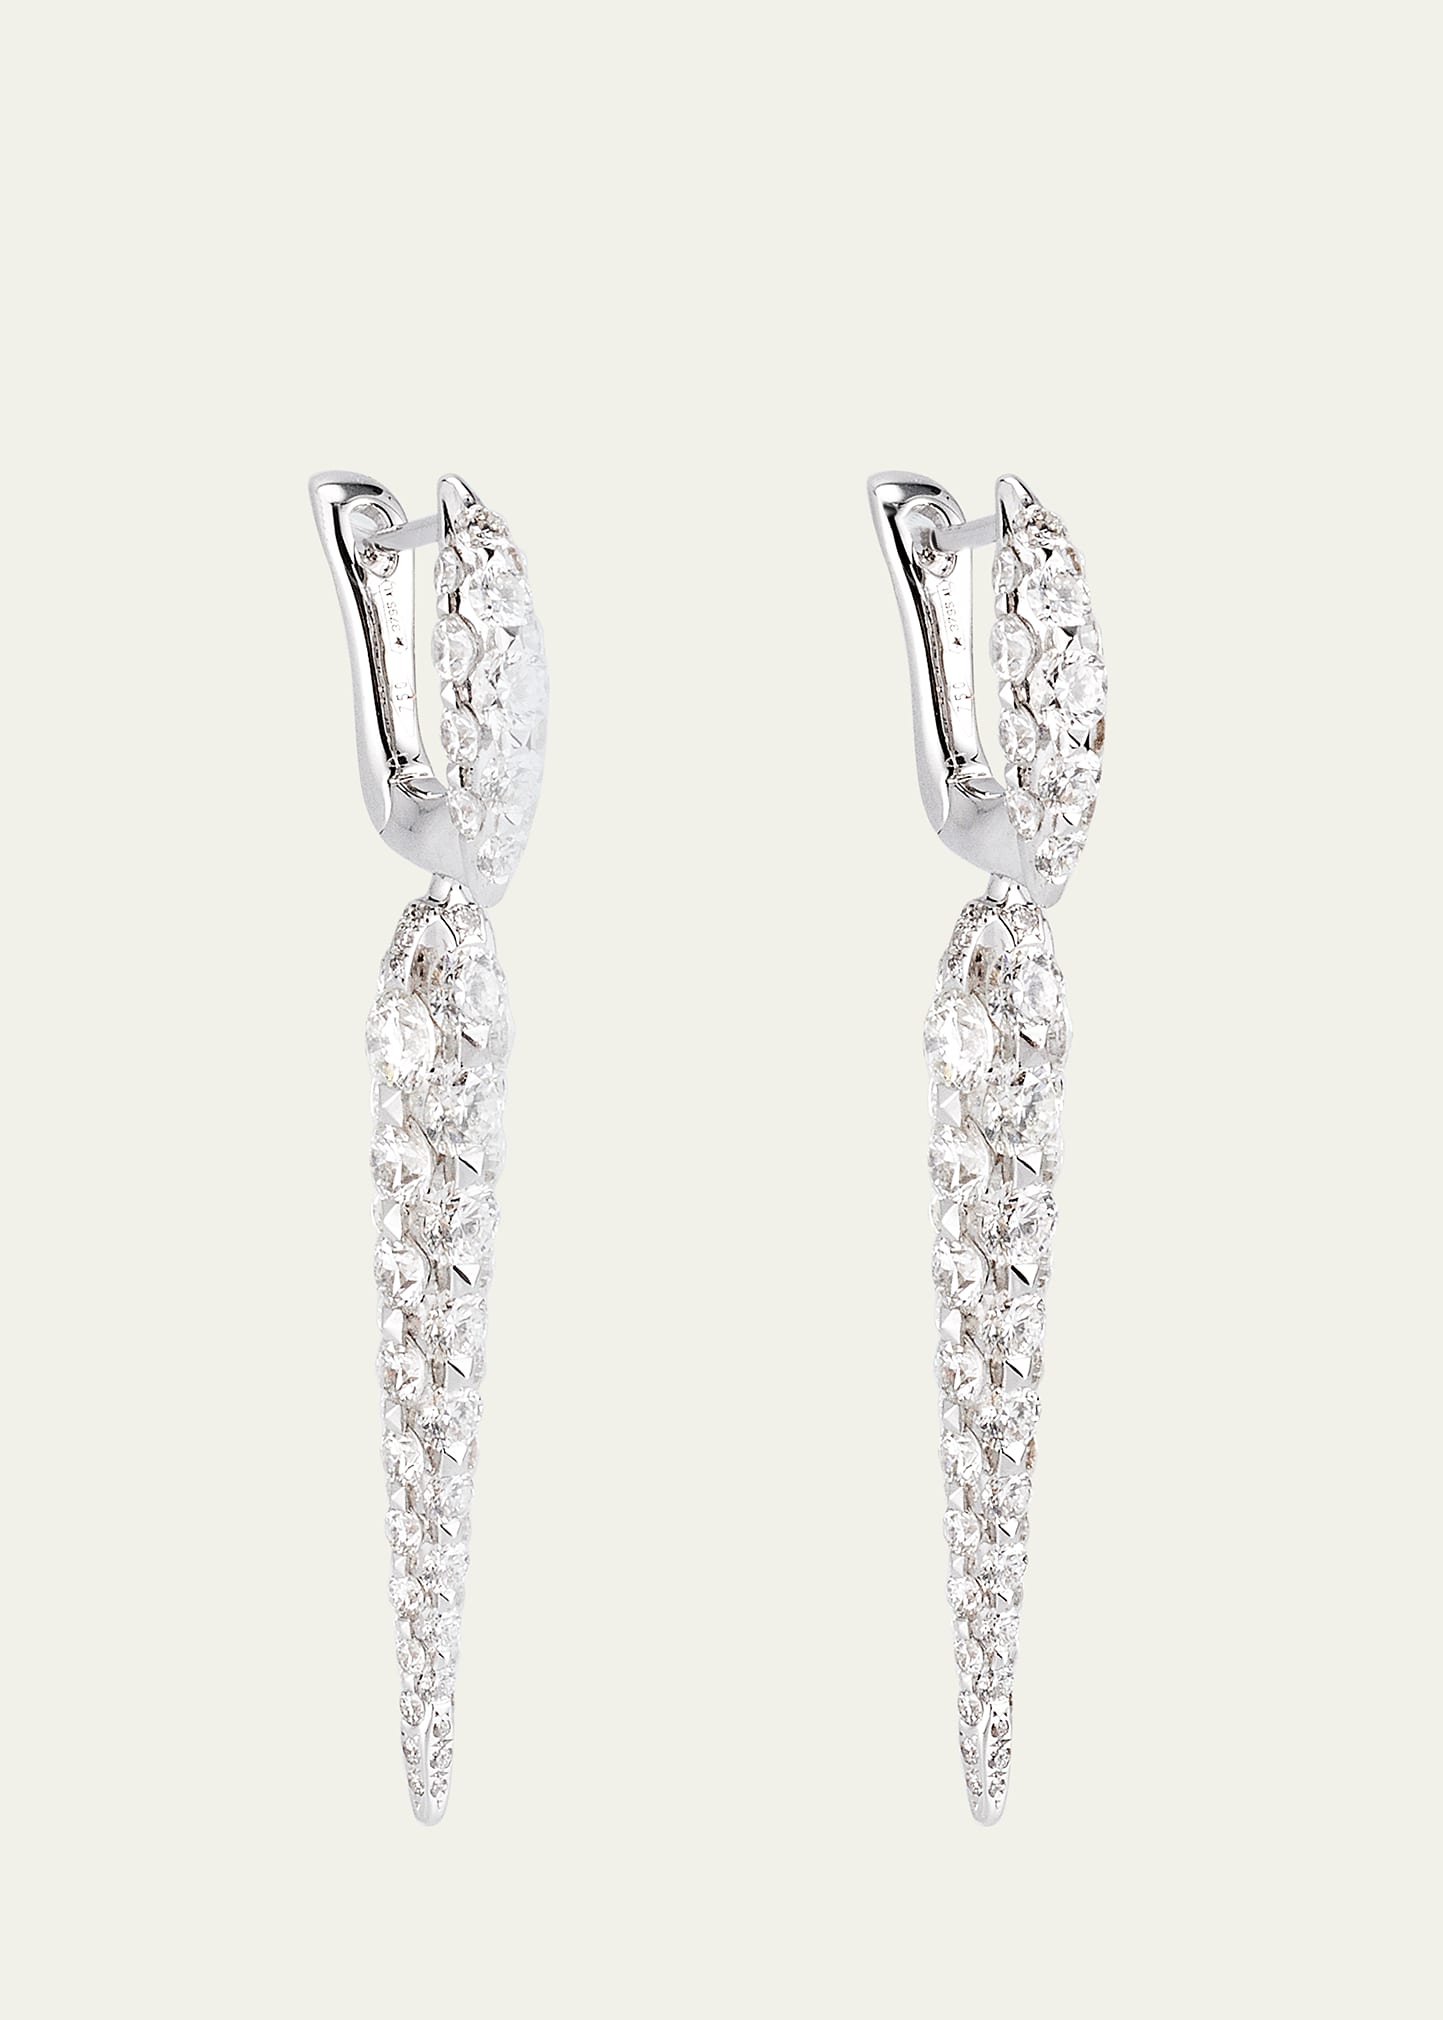 18k White Gold Merveilles Small Icicle Earrings with Diamonds